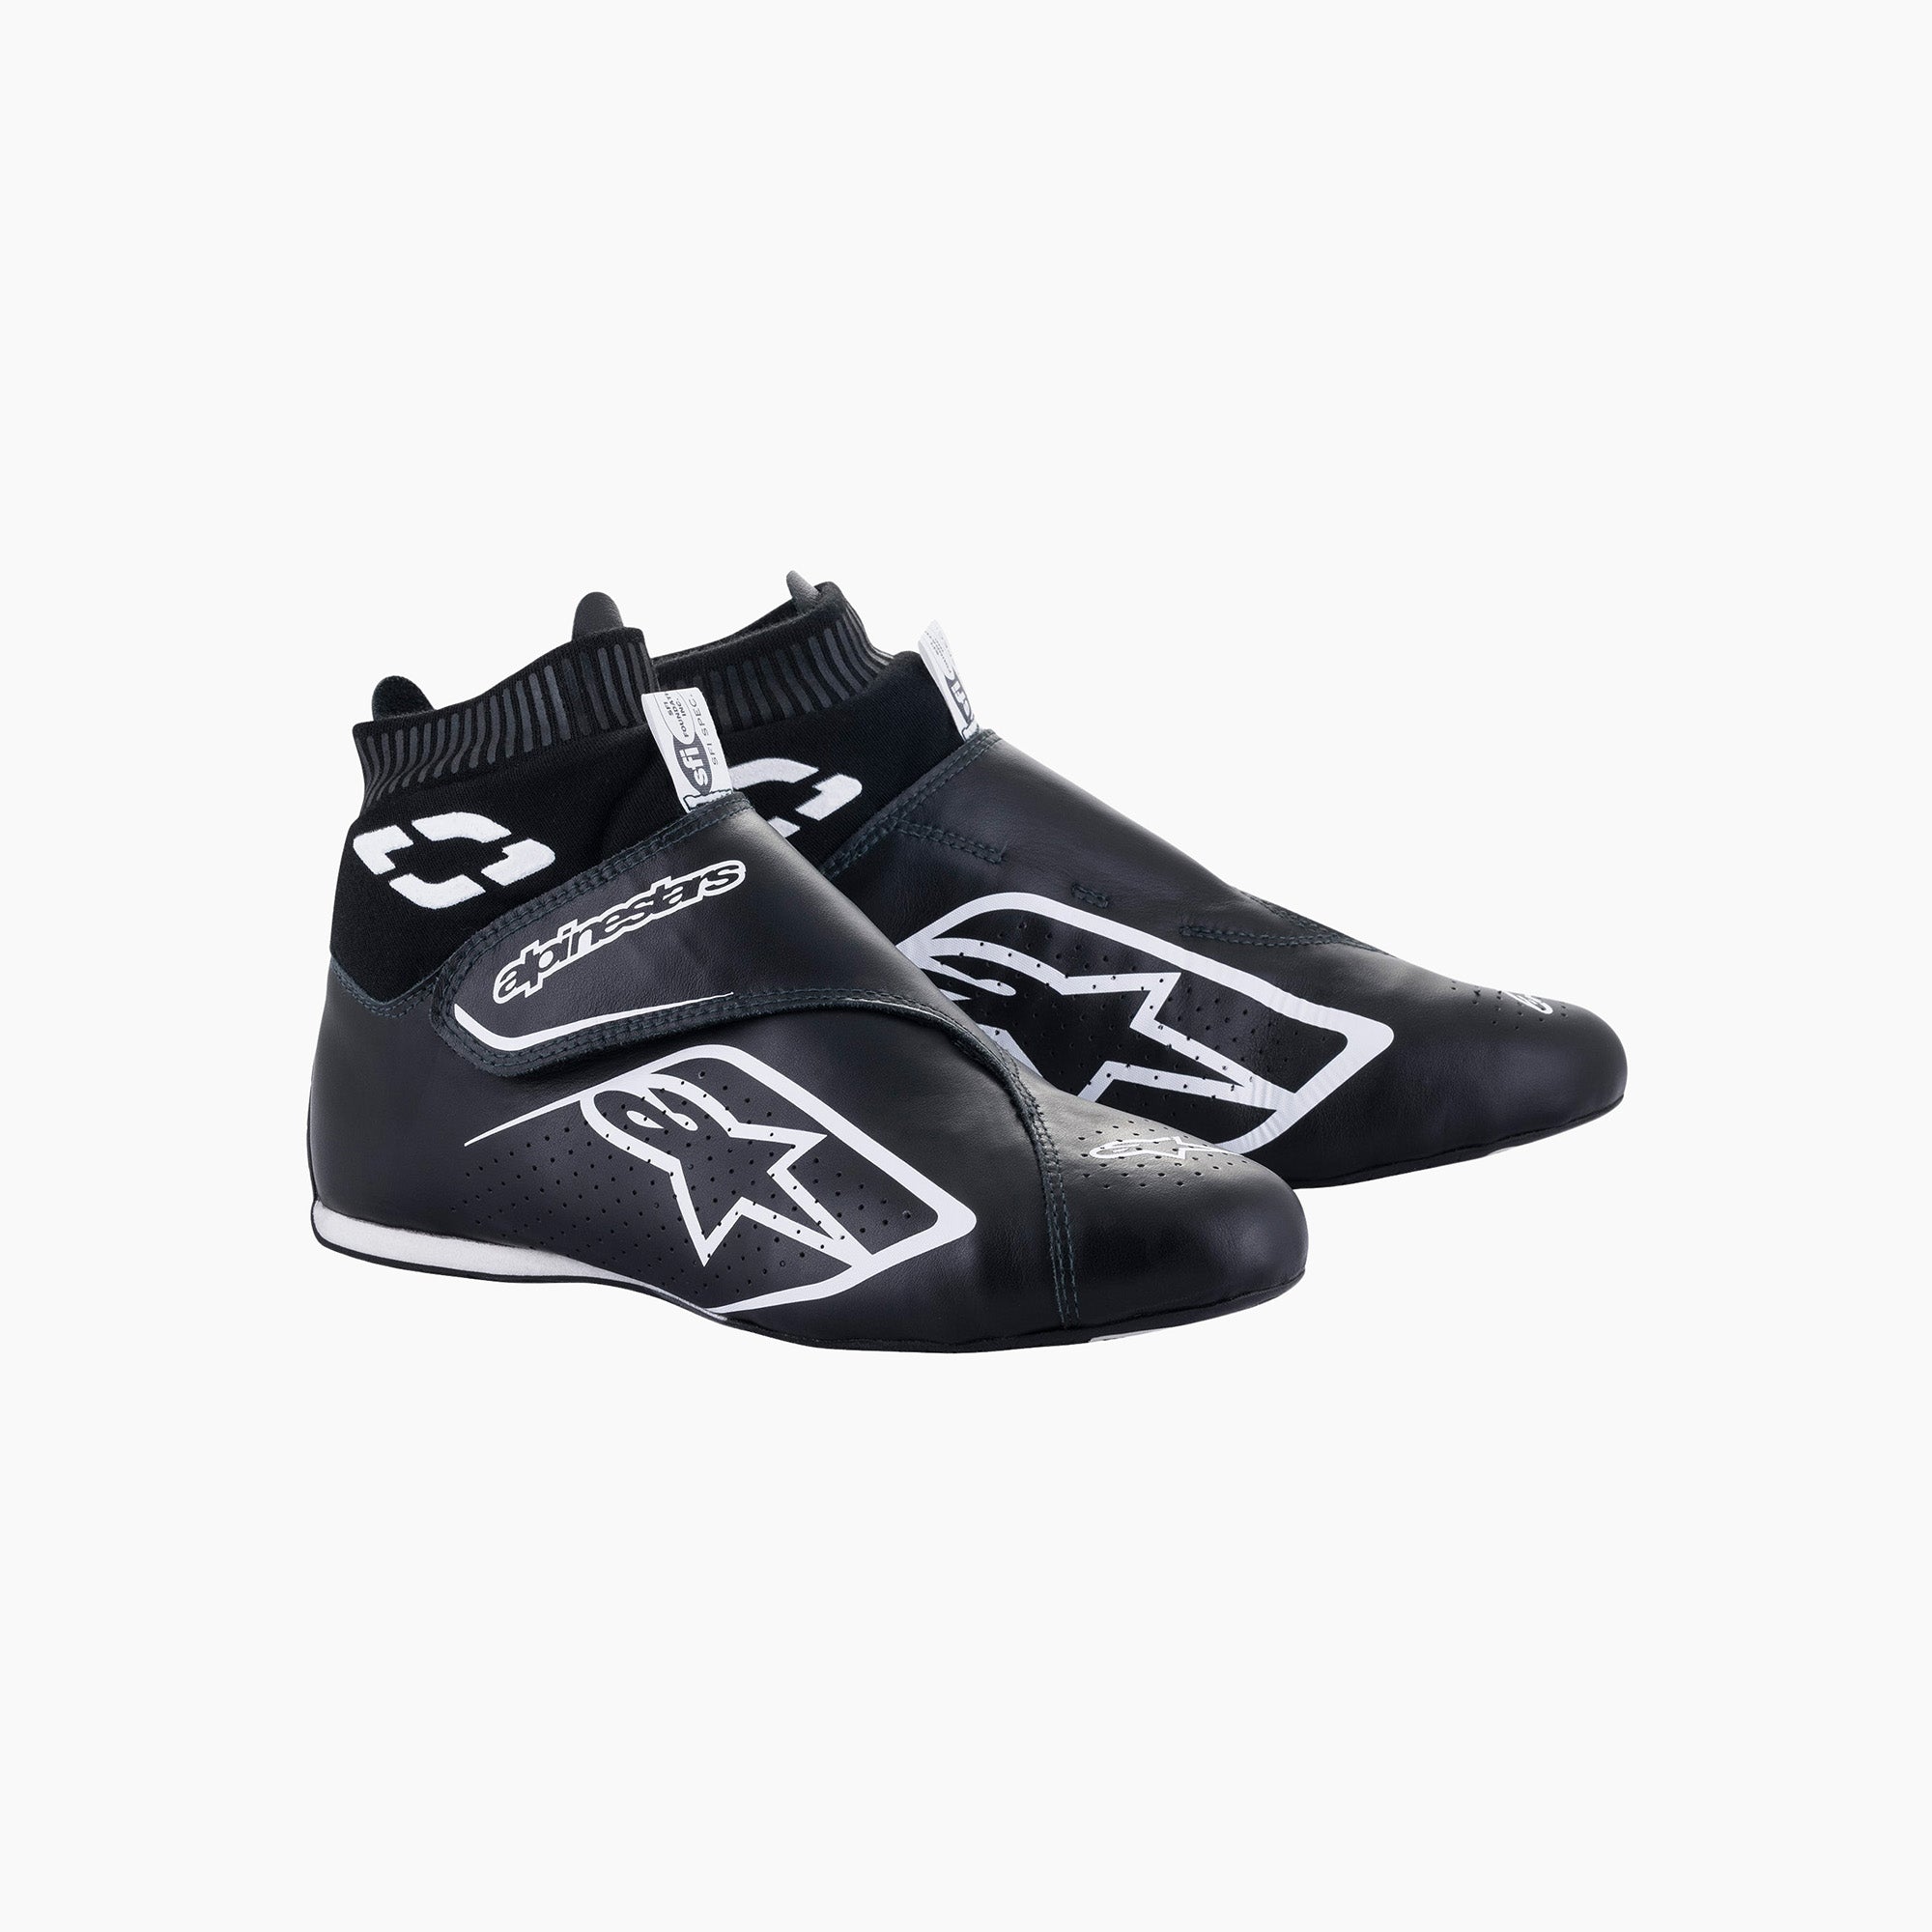 Racing Shoes | Collection of FIA Racing Shoes by GPX Store